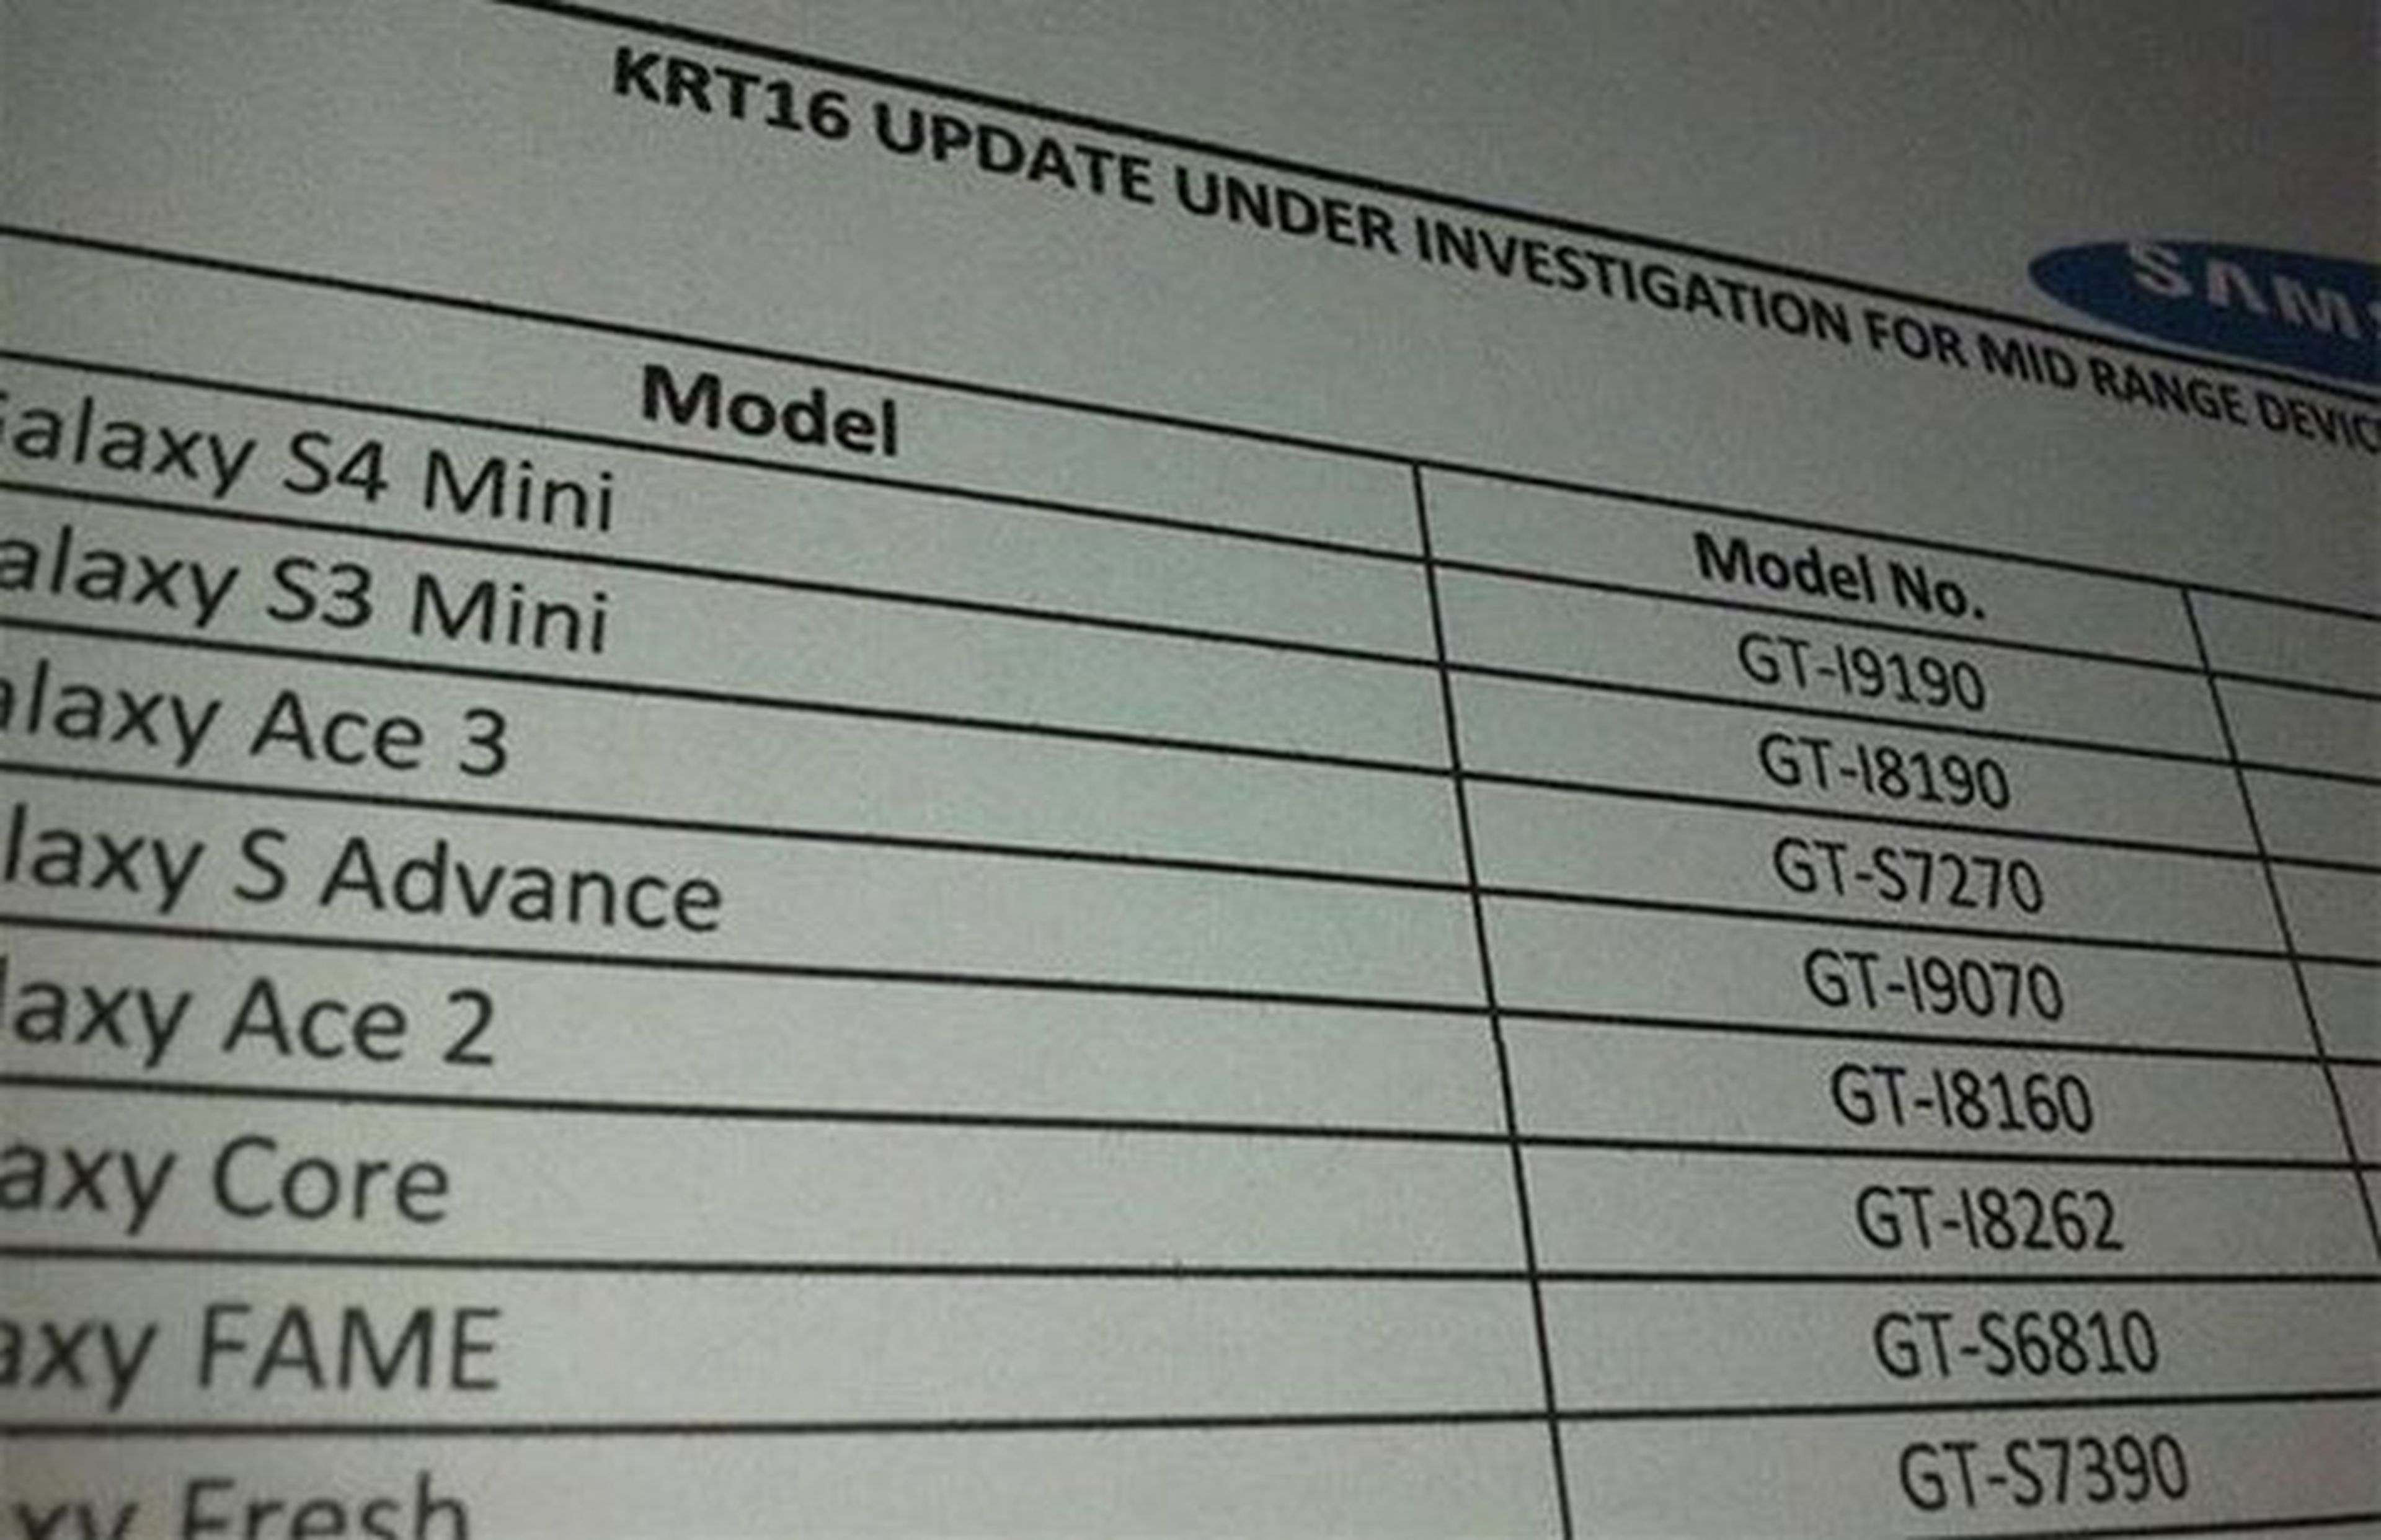 Samsung y Android 4.4 KitKat